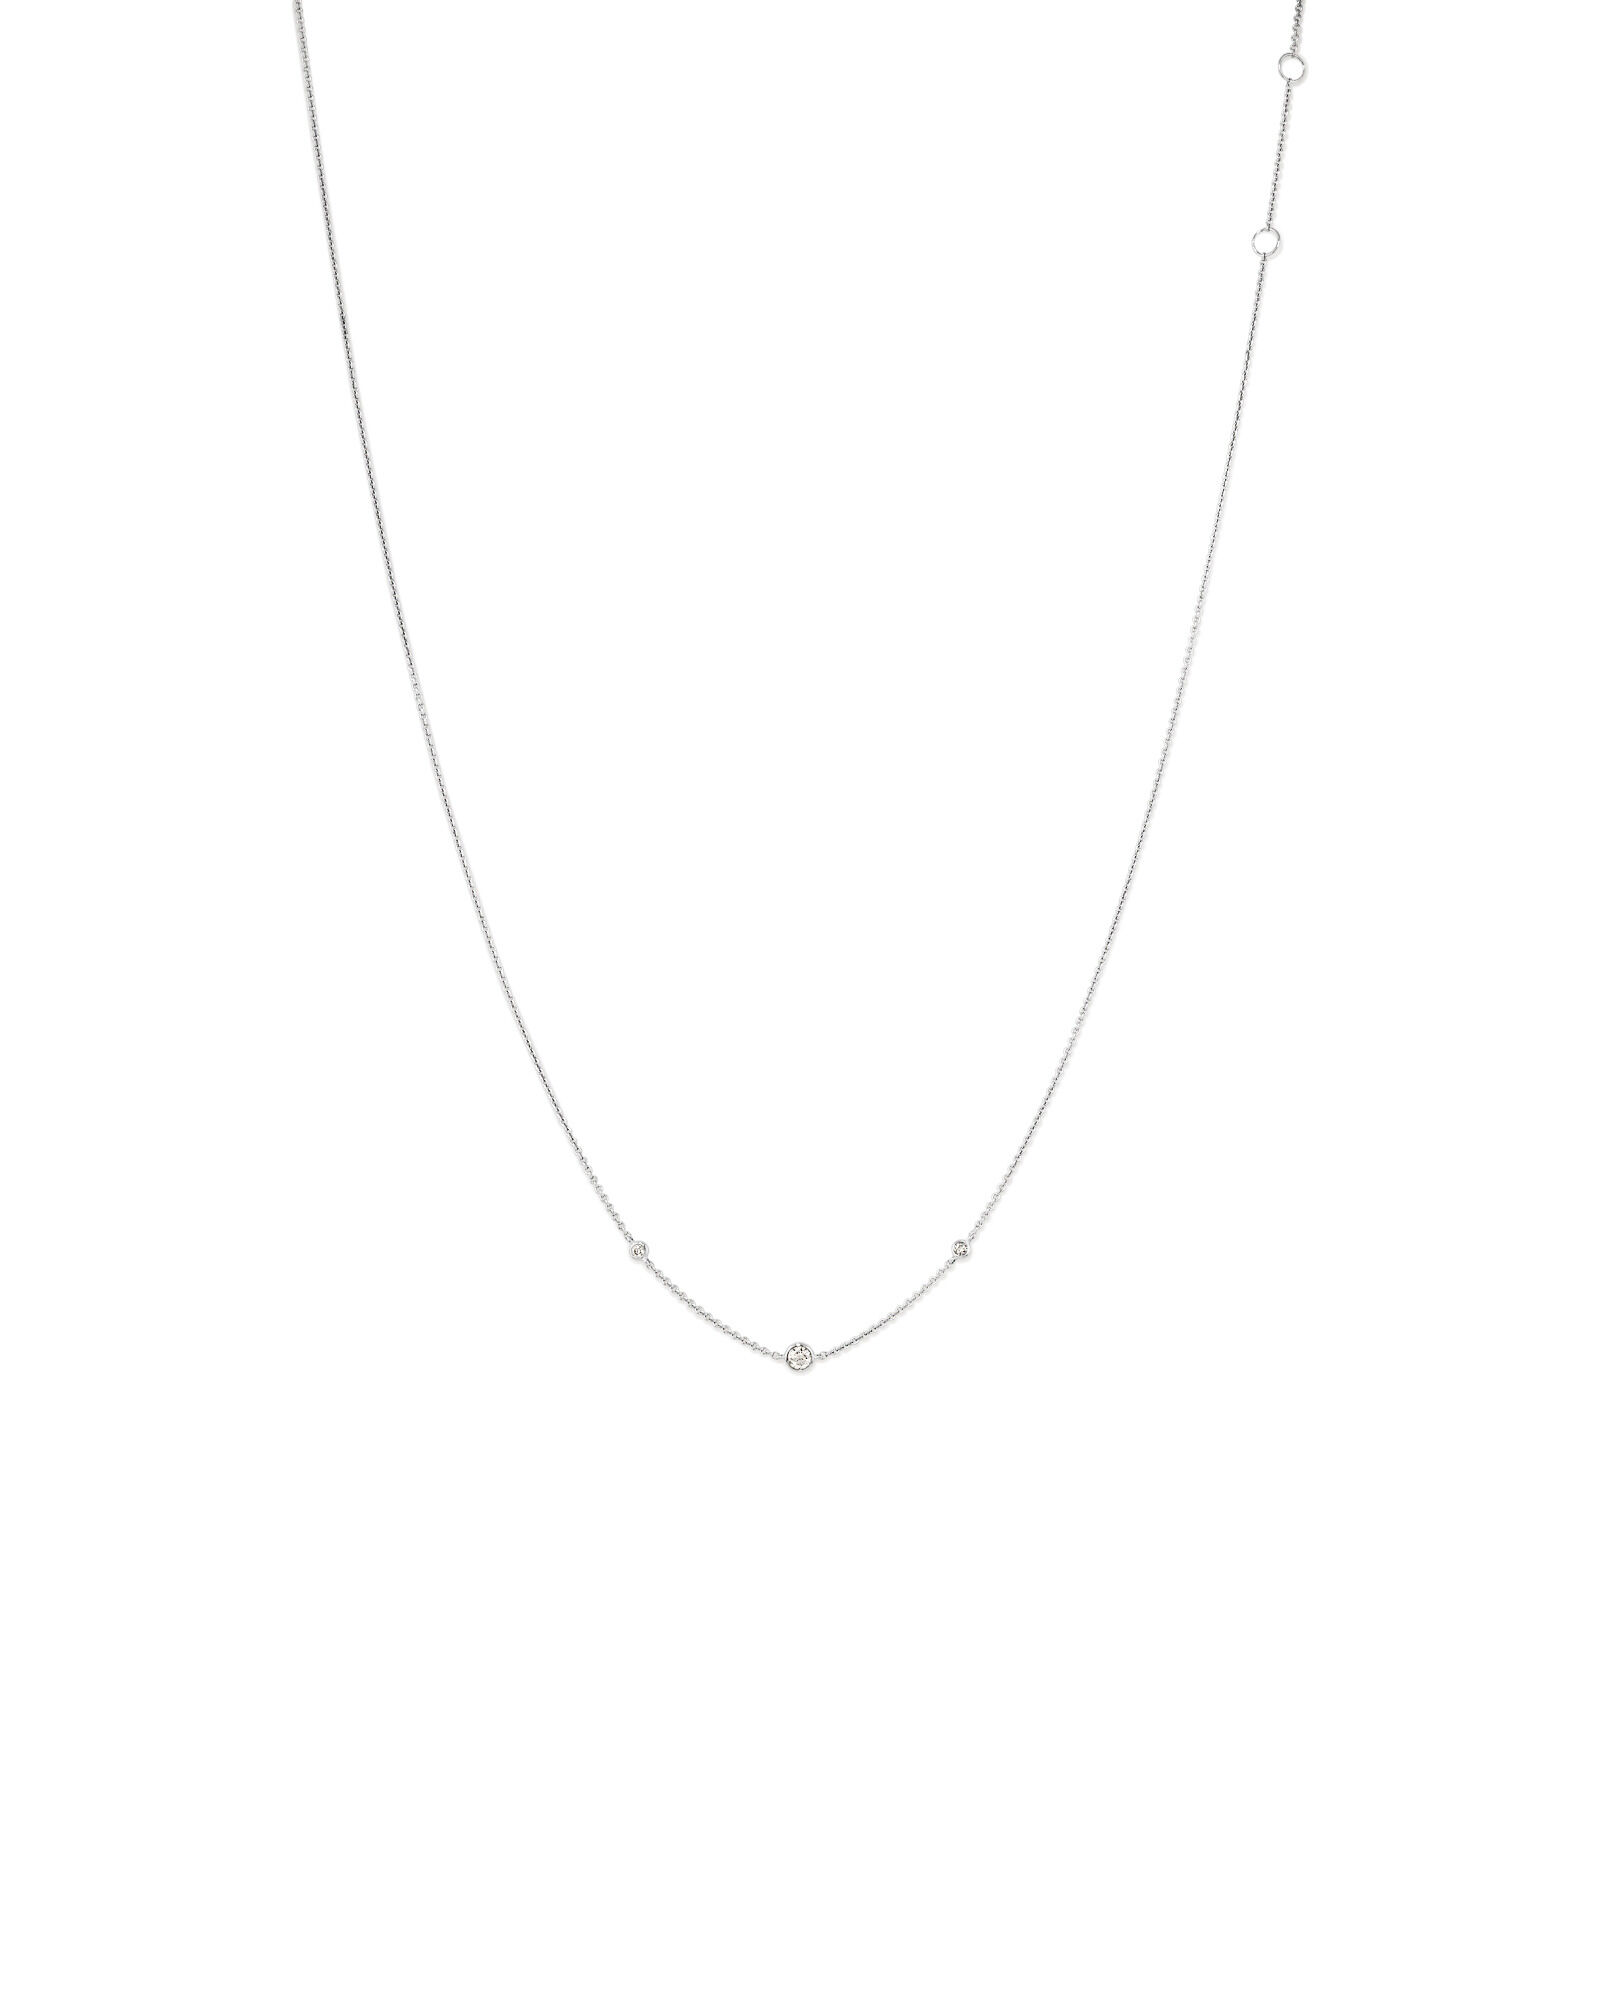 Station Necklace With 0.10 Carat TW Diamonds In Sterling Silver